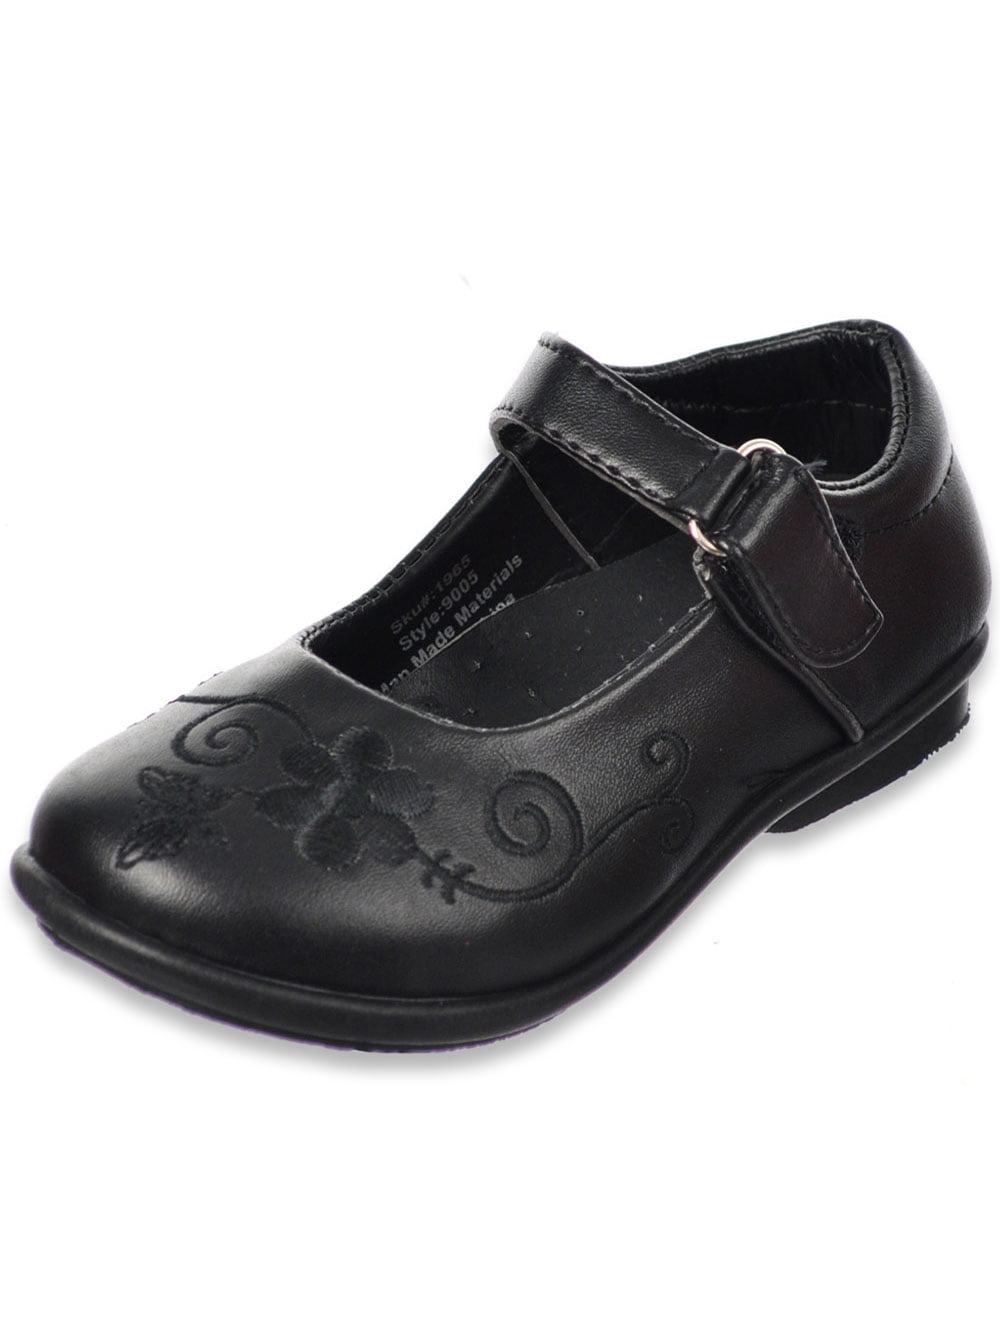 Girls Mary Jane Shoes Size 10 11 12 13 1 2 Kids Flower CAT Velcro Black School Faux Leather Formal Strap Shoes 